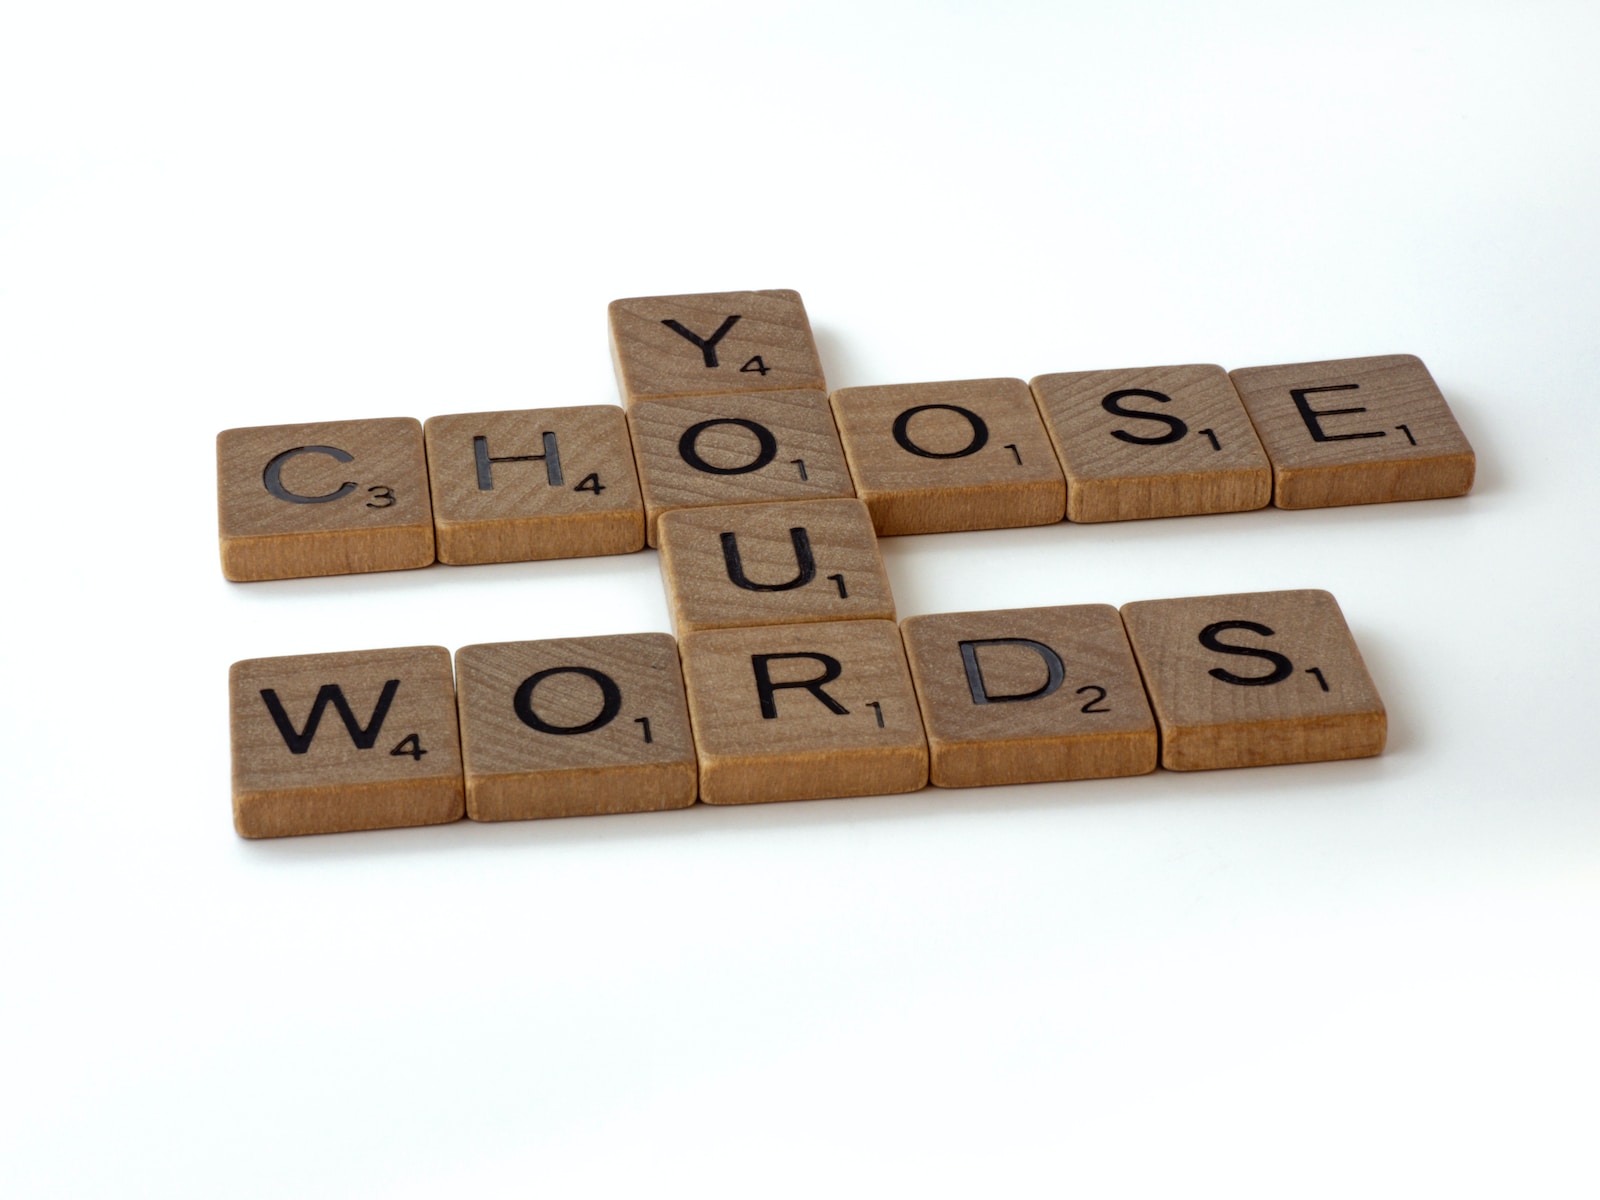 Back to Basics: Choosing Words Wisely